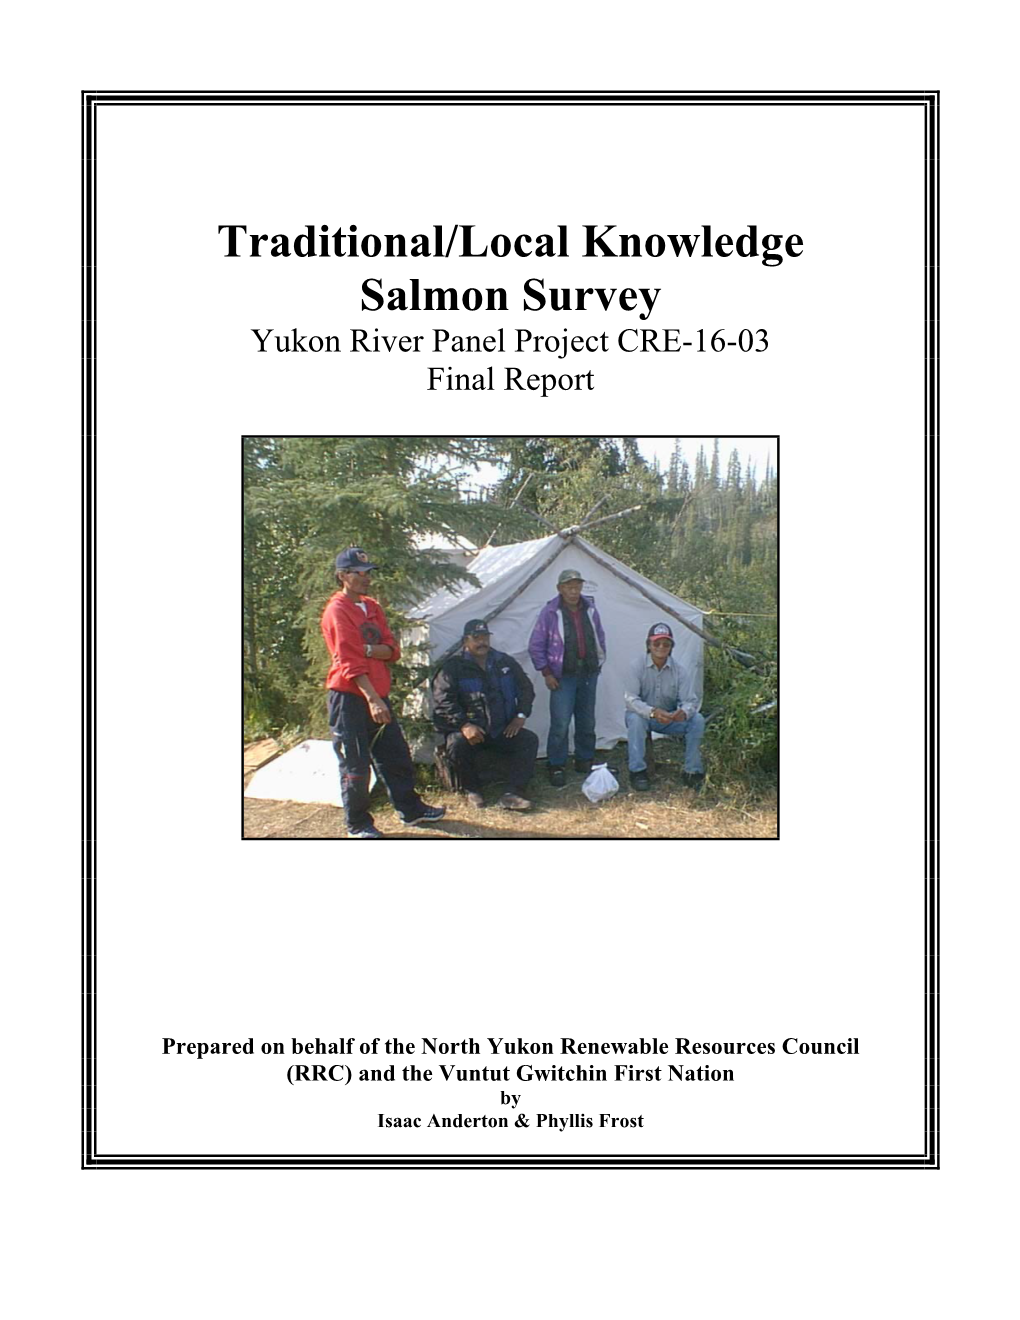 Traditional/Local Knowledge Salmon Survey Yukon River Panel Project CRE-16-03 Final Report